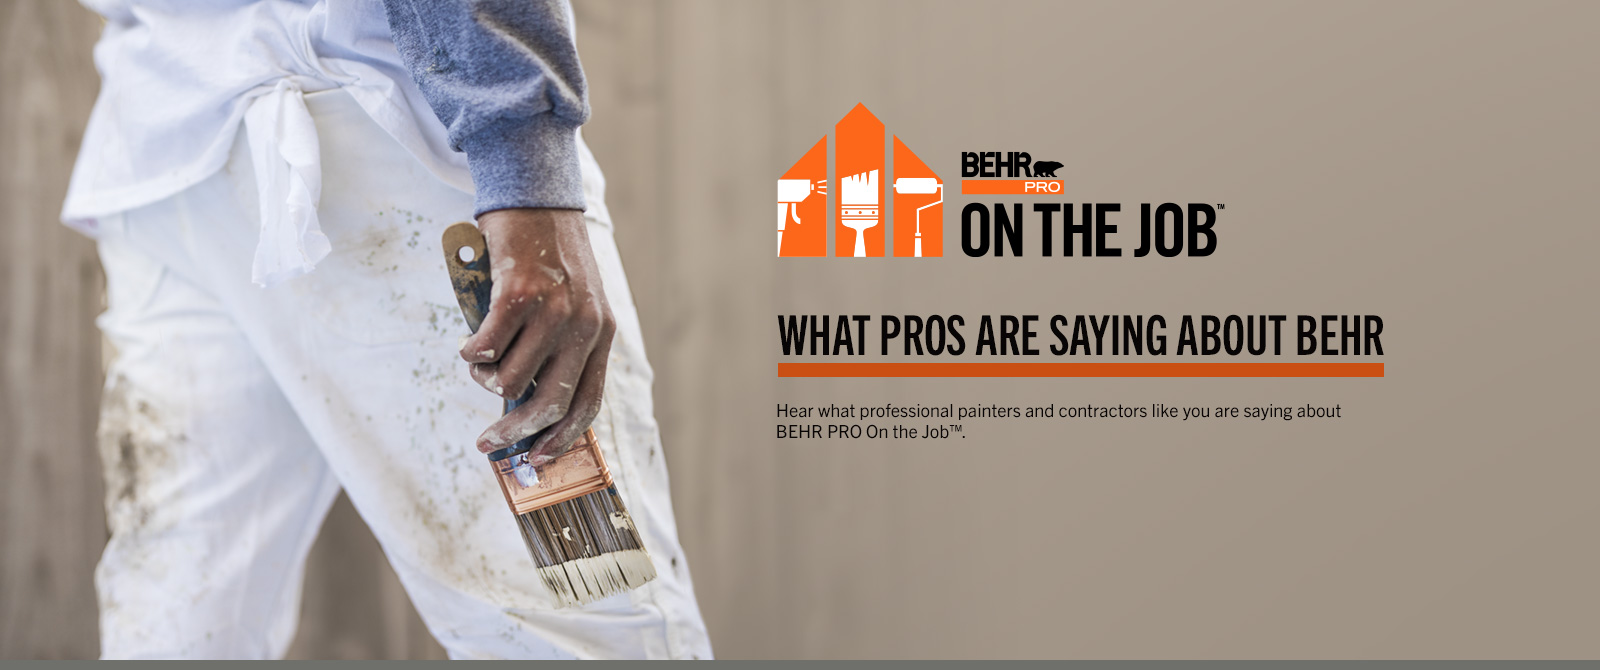  BEHR PRO ON THE JOB - See what Pros are saying about Behr